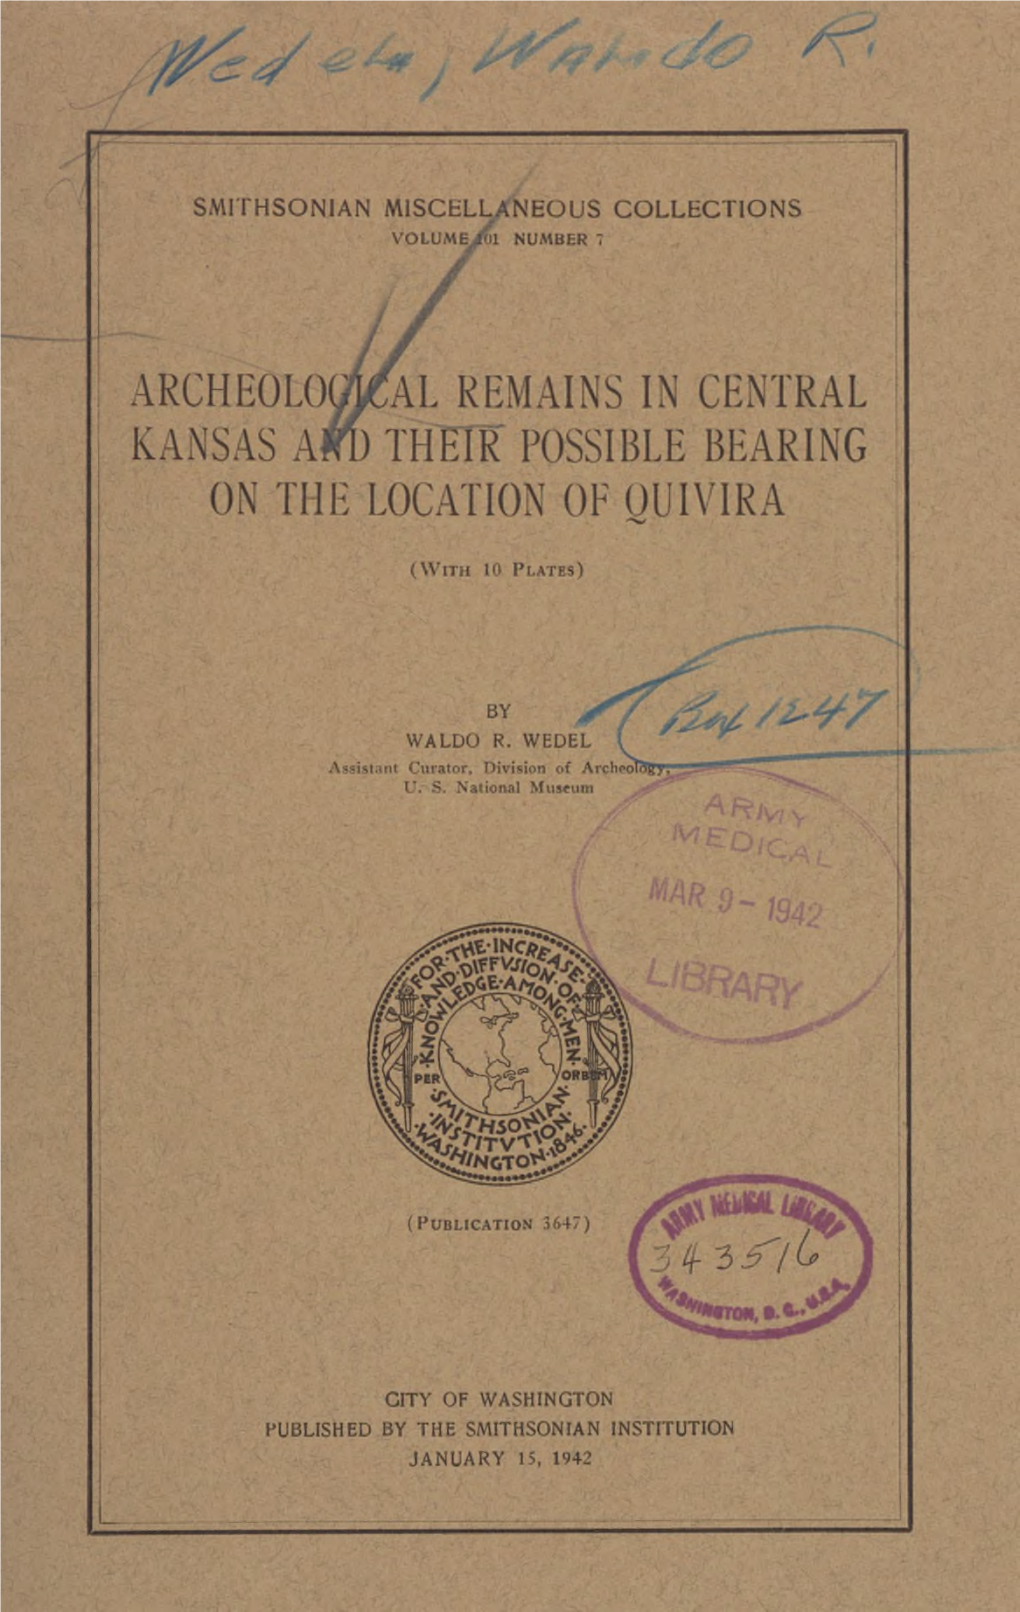 ARCHEOLOGICAL REMAINS in CENTRAL KANSAS Pm THEIR POSSIBLE BEARING on the LOCATION of OUIVIRA